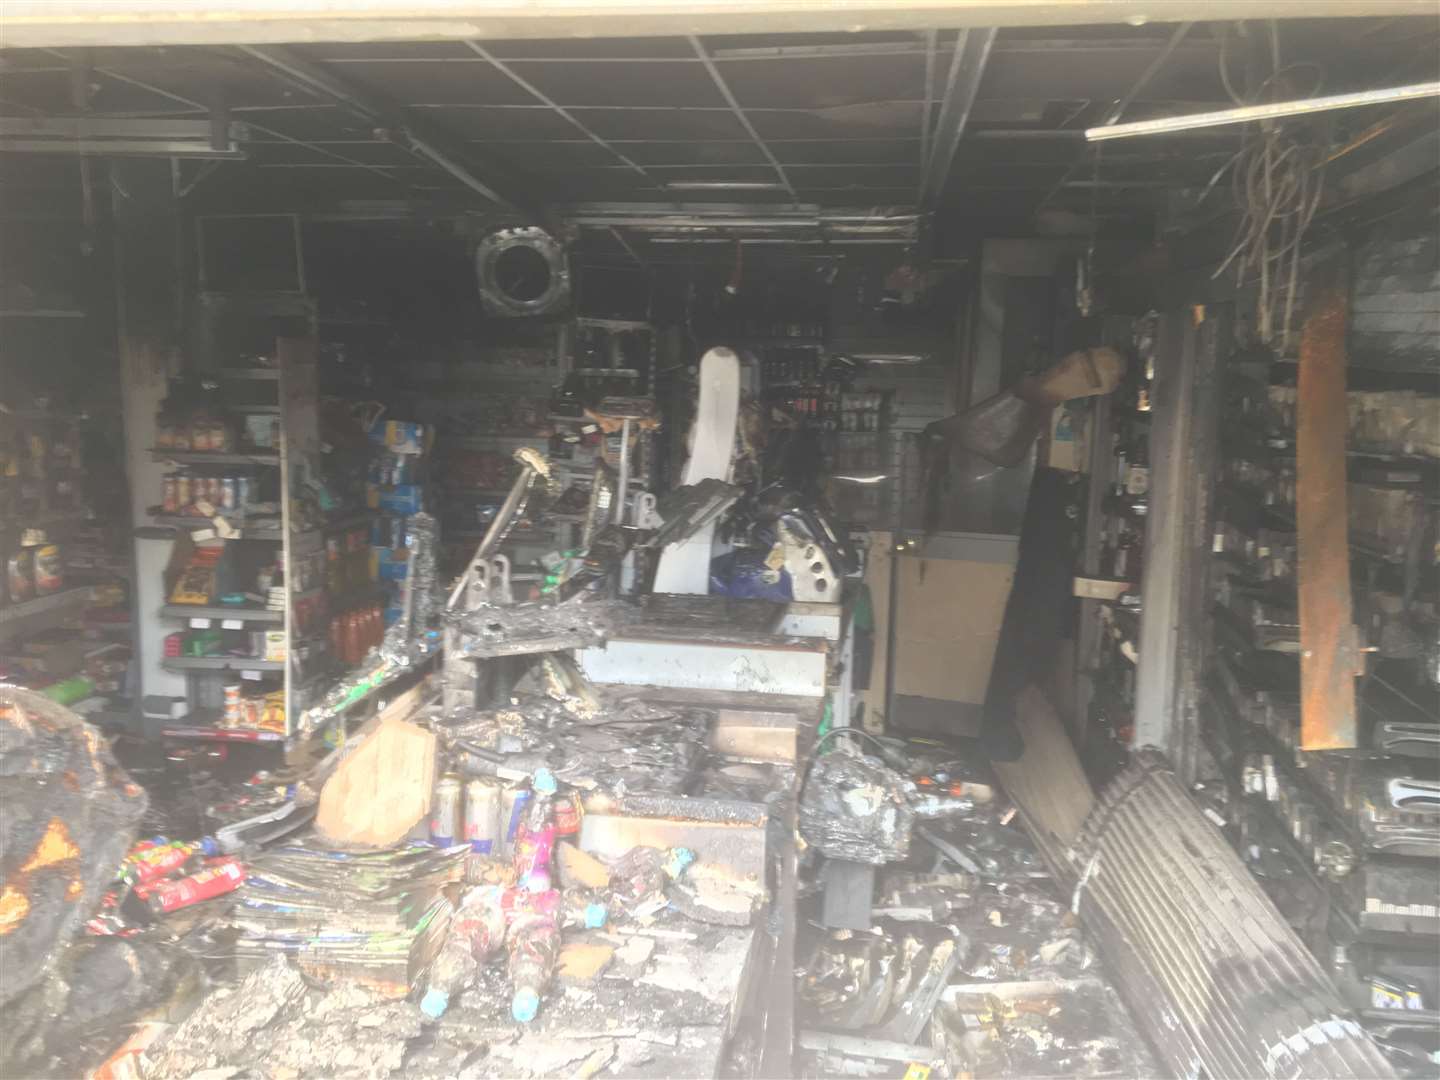 What's left of the inside of the Co-op store in The Street, Upchurch